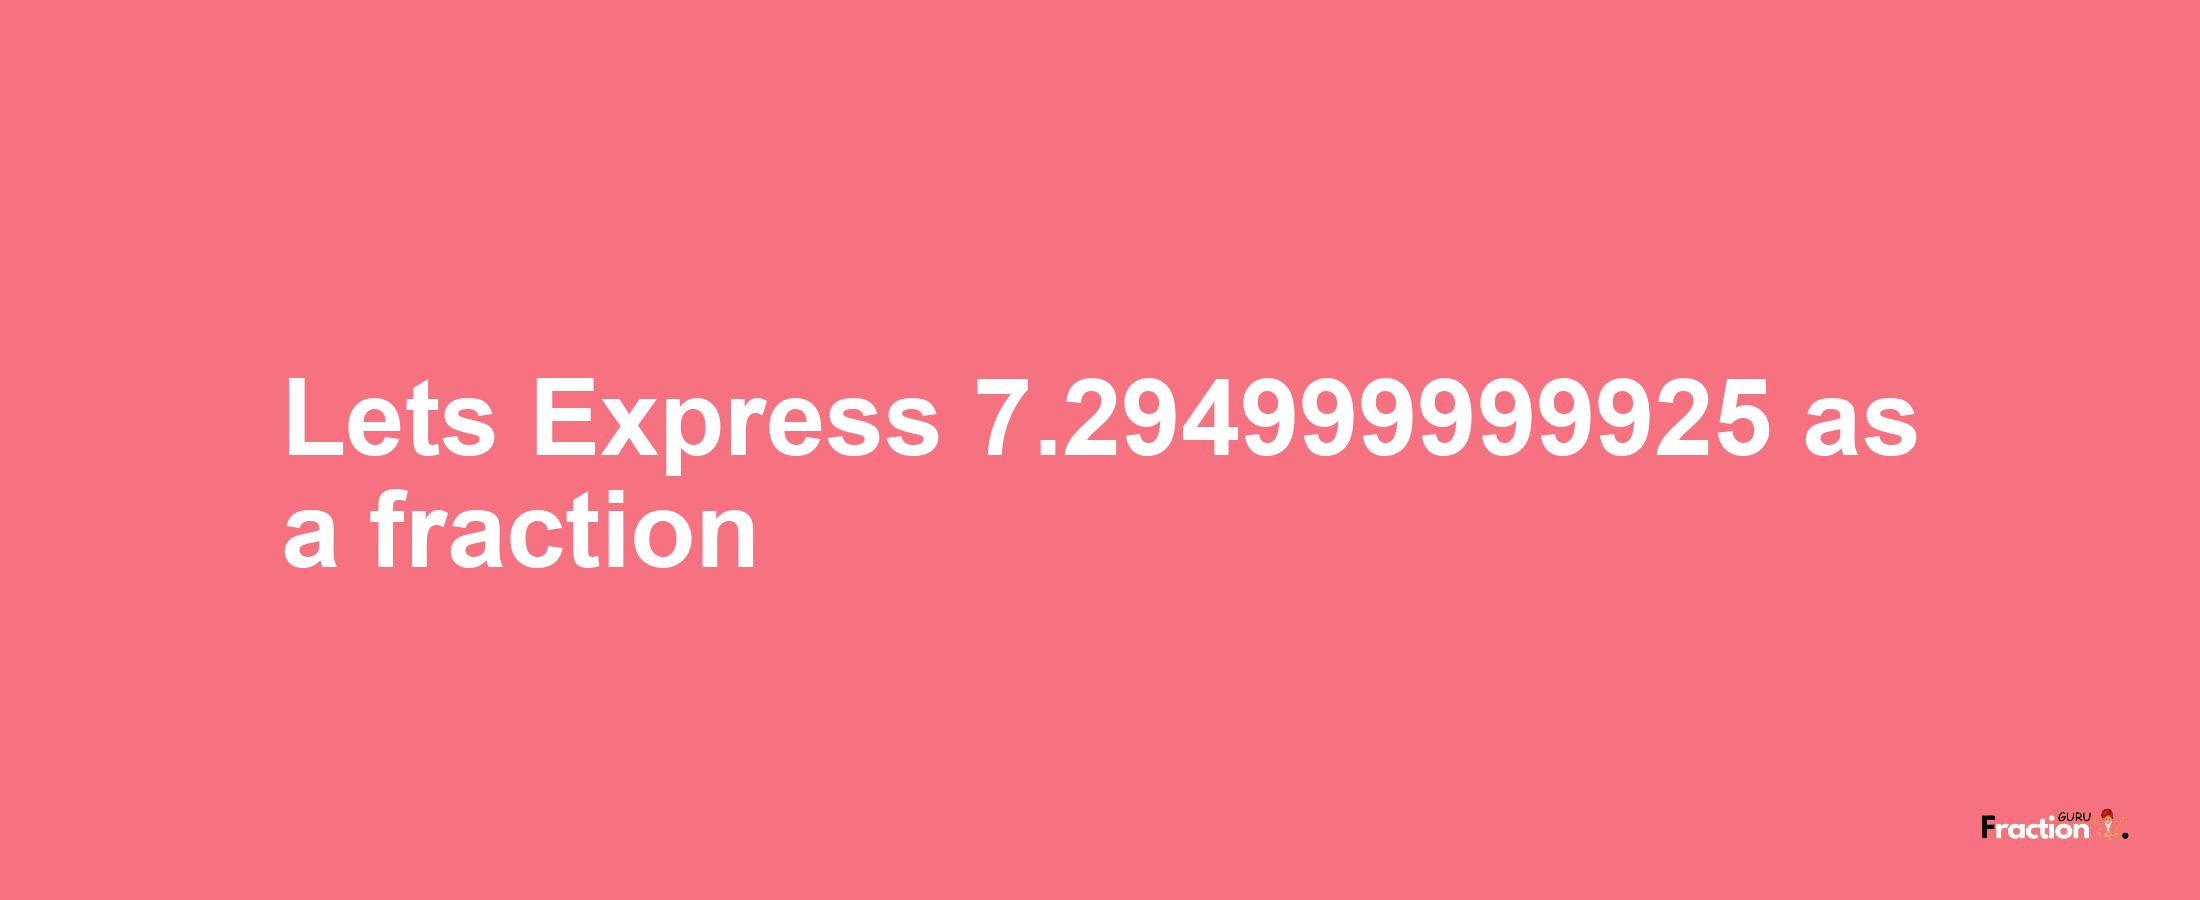 Lets Express 7.294999999925 as afraction